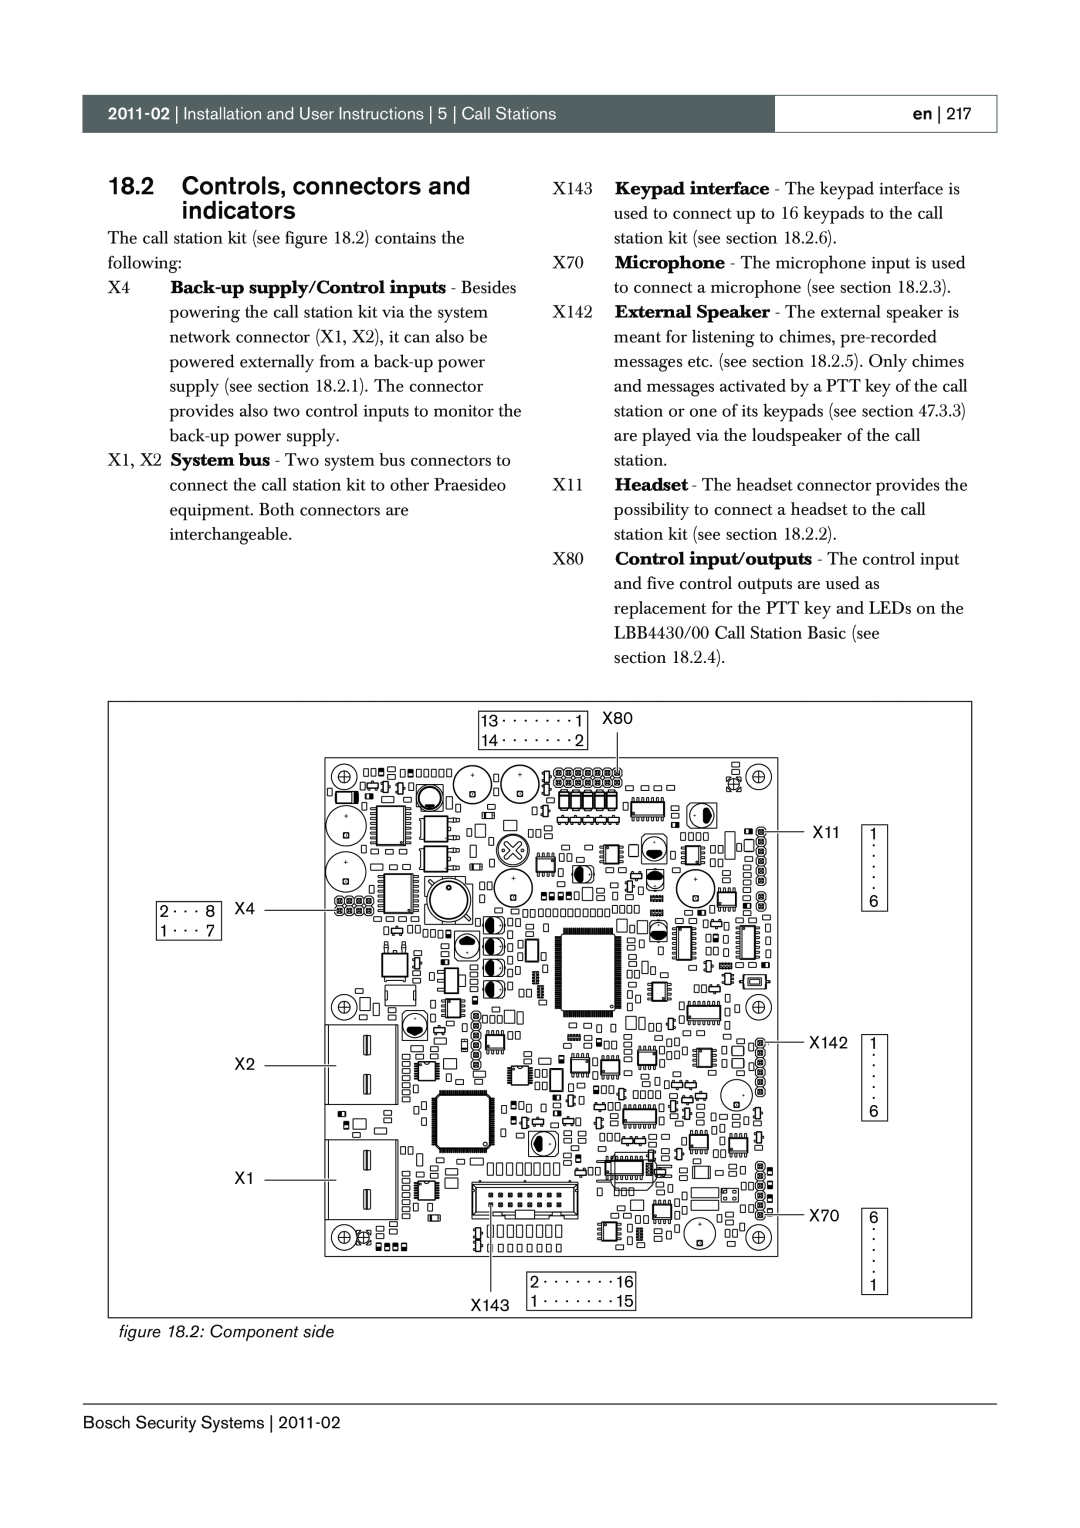 Bosch Appliances 3.5 18.2, Controls, connectors and, indicators, Back-upsupply/Control inputs - Besides, 2: Component side 